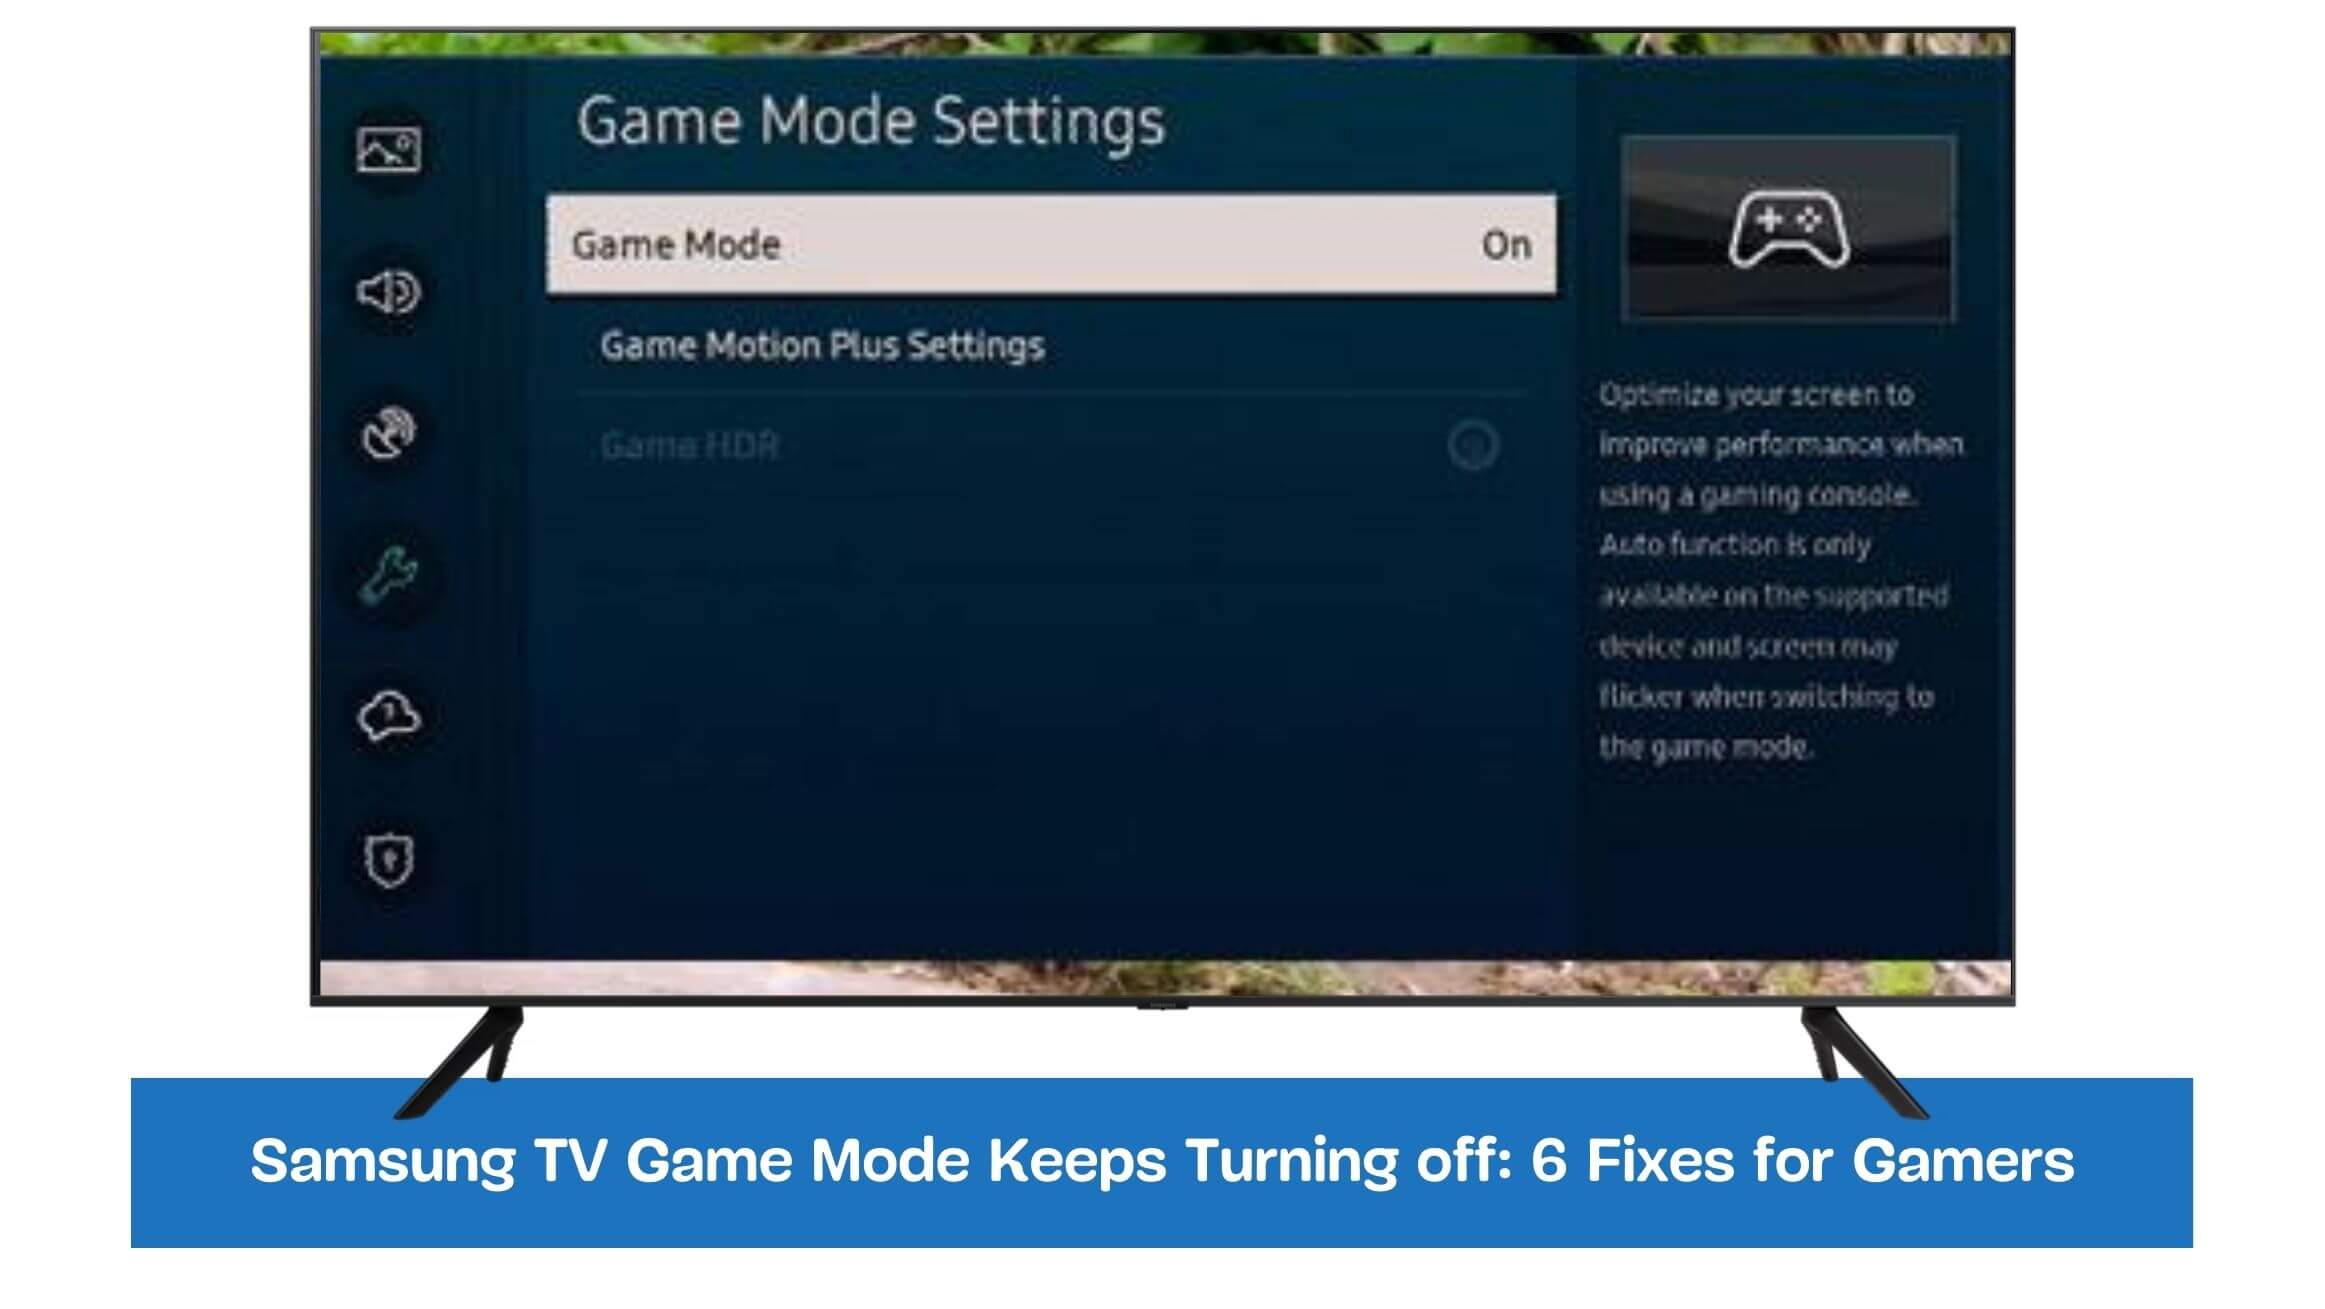 Samsung TV Game Mode Keeps Turning off: 6 Fixes for Gamers